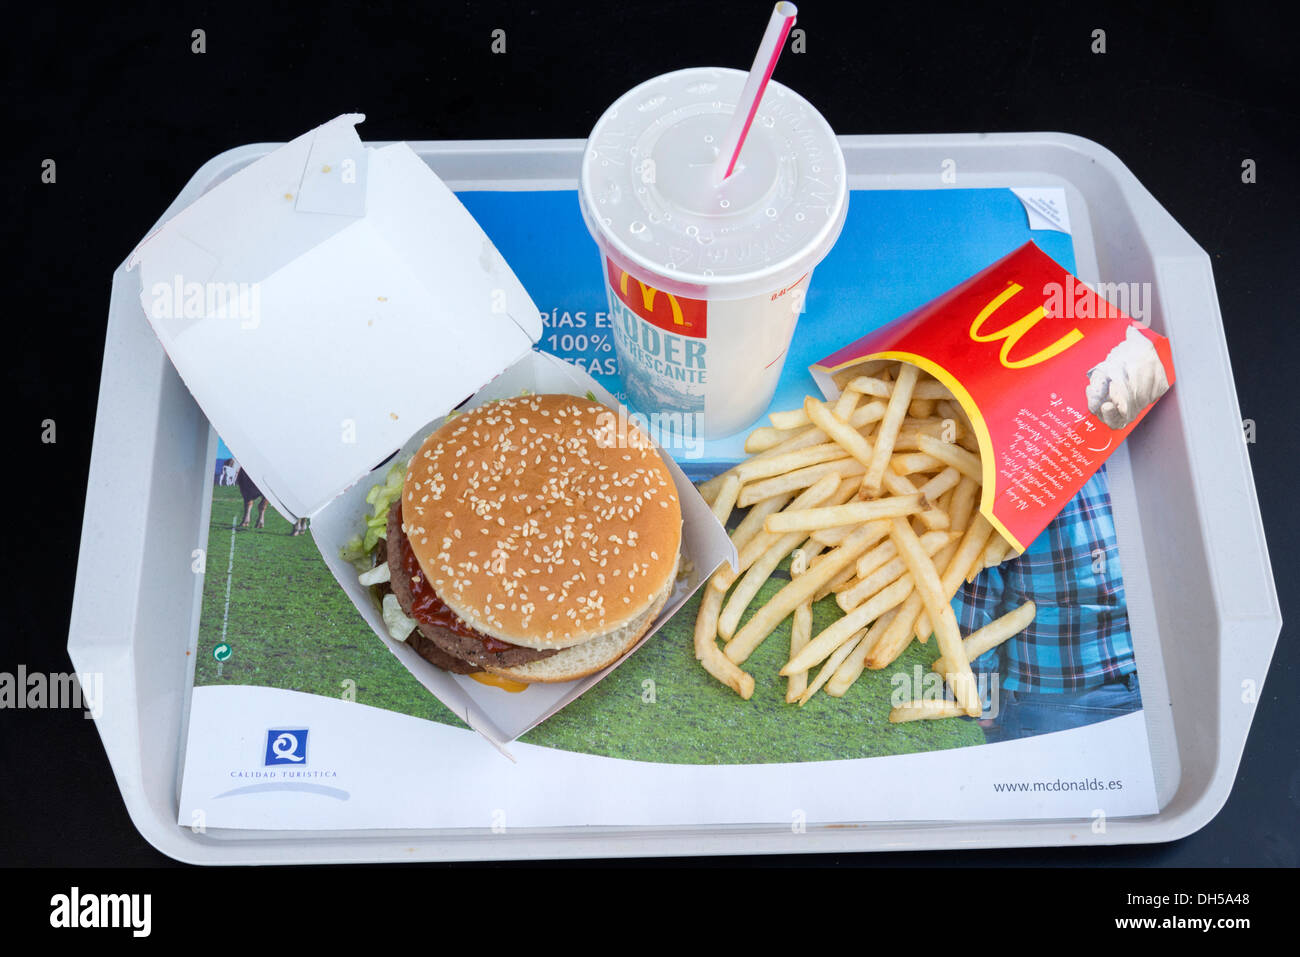 McDonald's meal of Big Mac, french fries and a soft drink Stock Photo